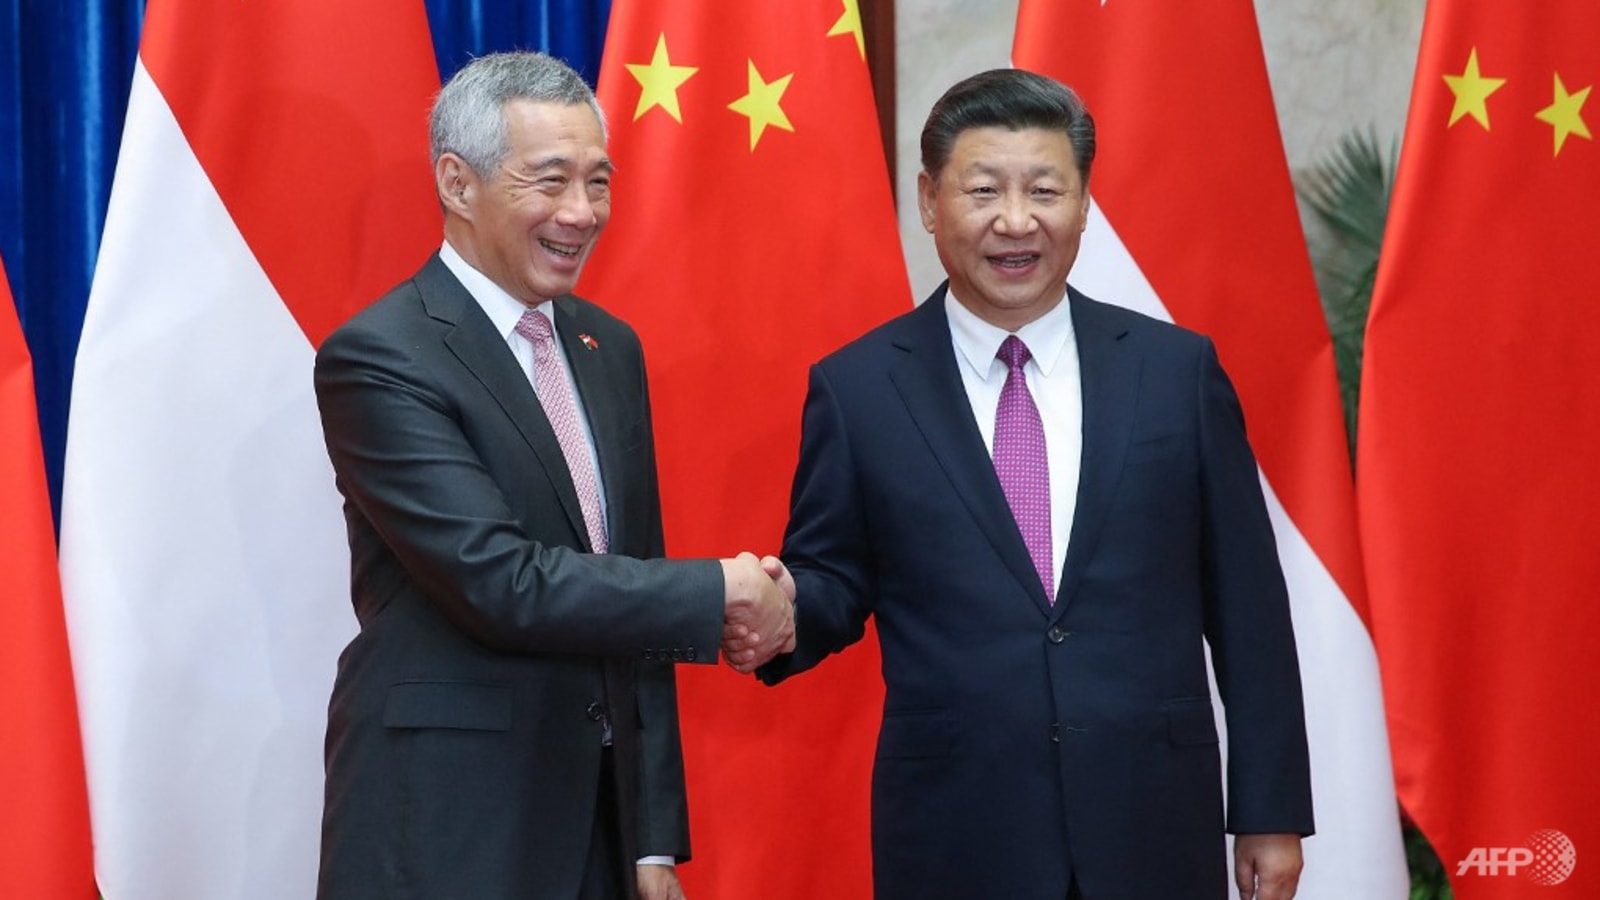 pm-lee-congratulates-chinese-president-xi-on-reappointment-as-communist-party-leader